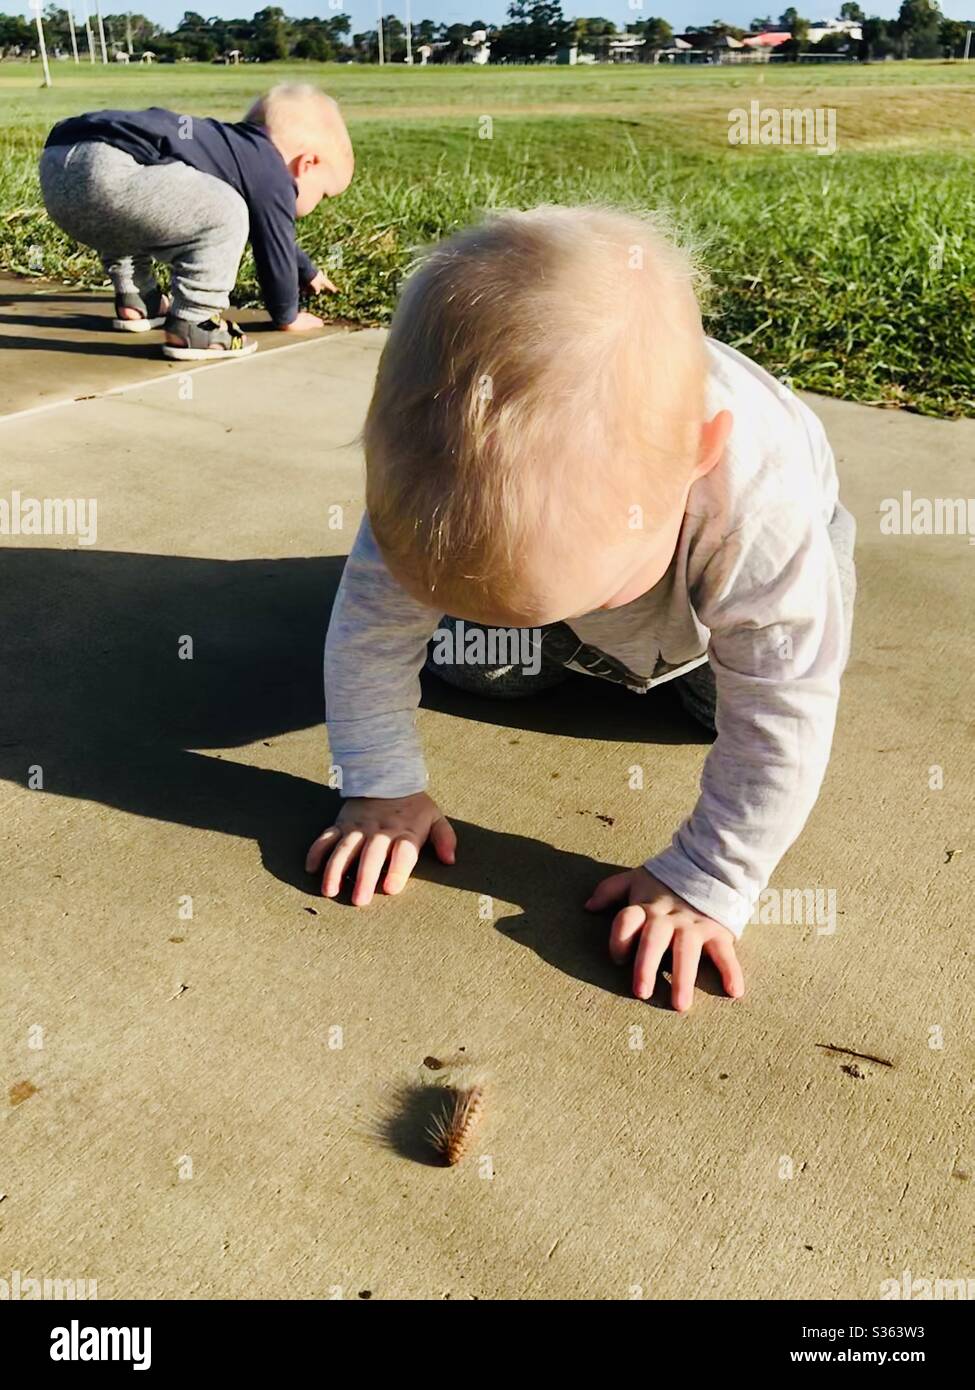 A child’s curiosity for nature. Twin boys caterpillar hunting Stock Photo